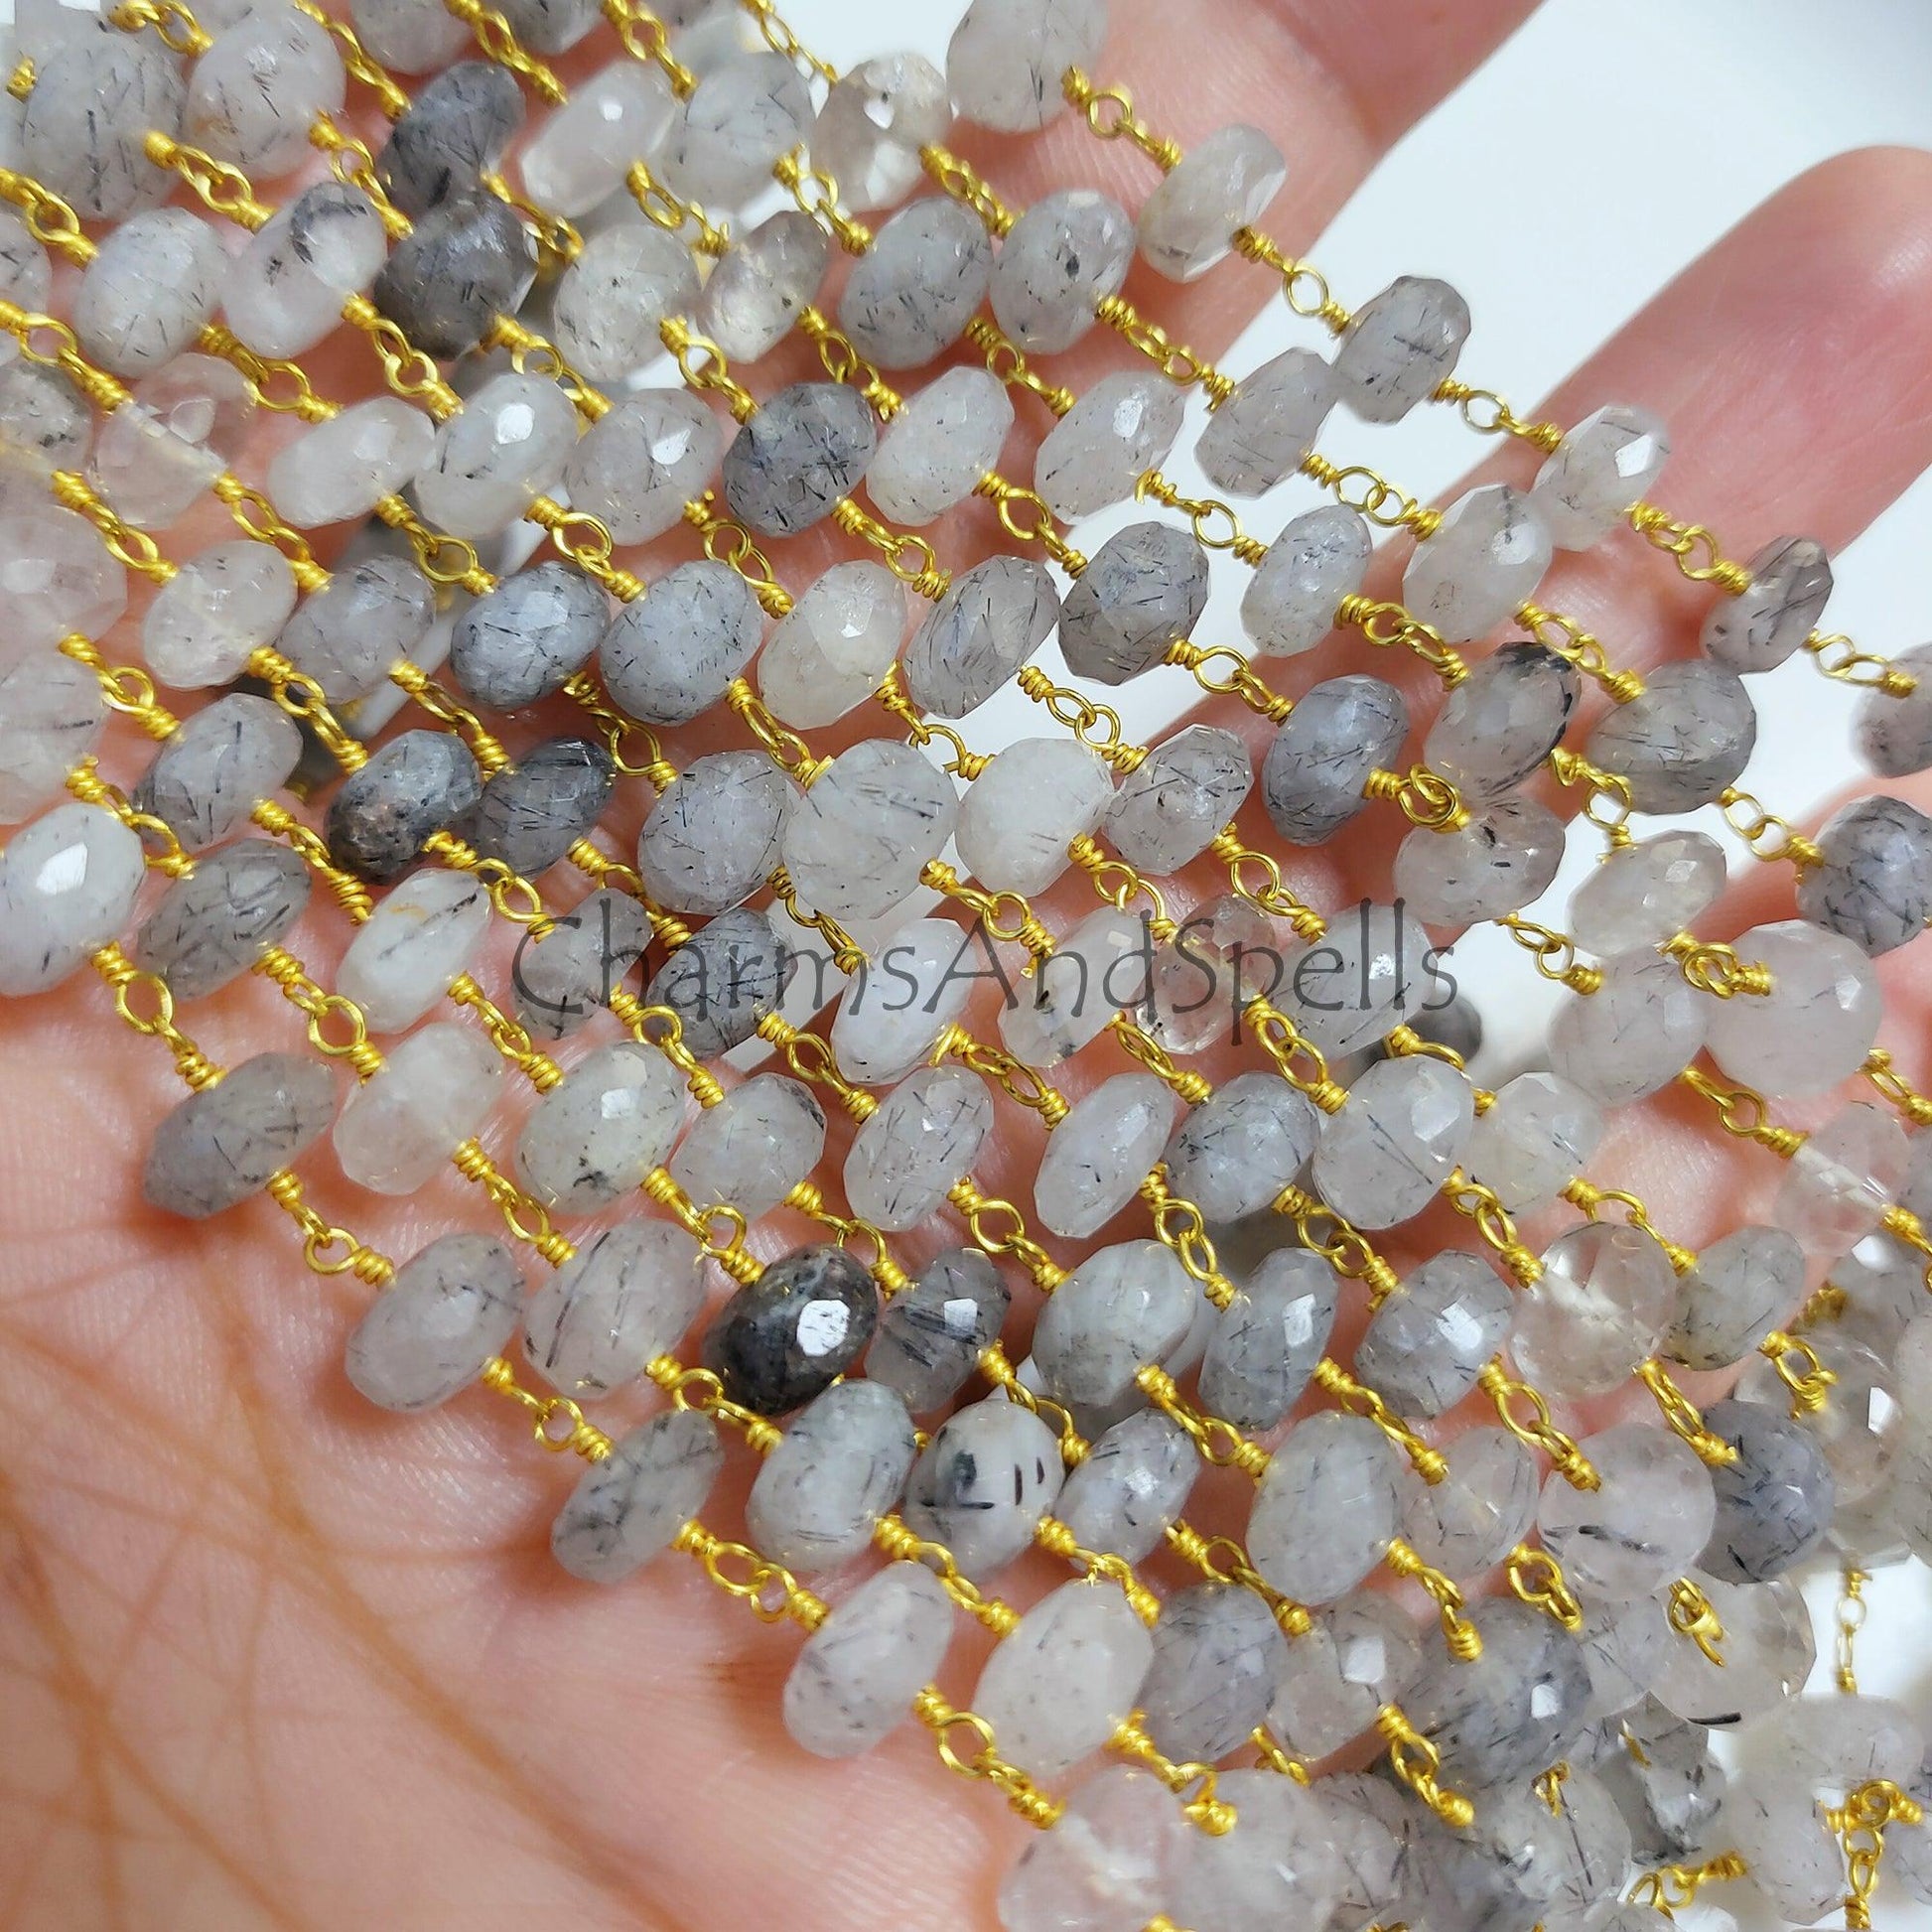 jewelry wire wholesale, jewelry wire wholesale Suppliers and